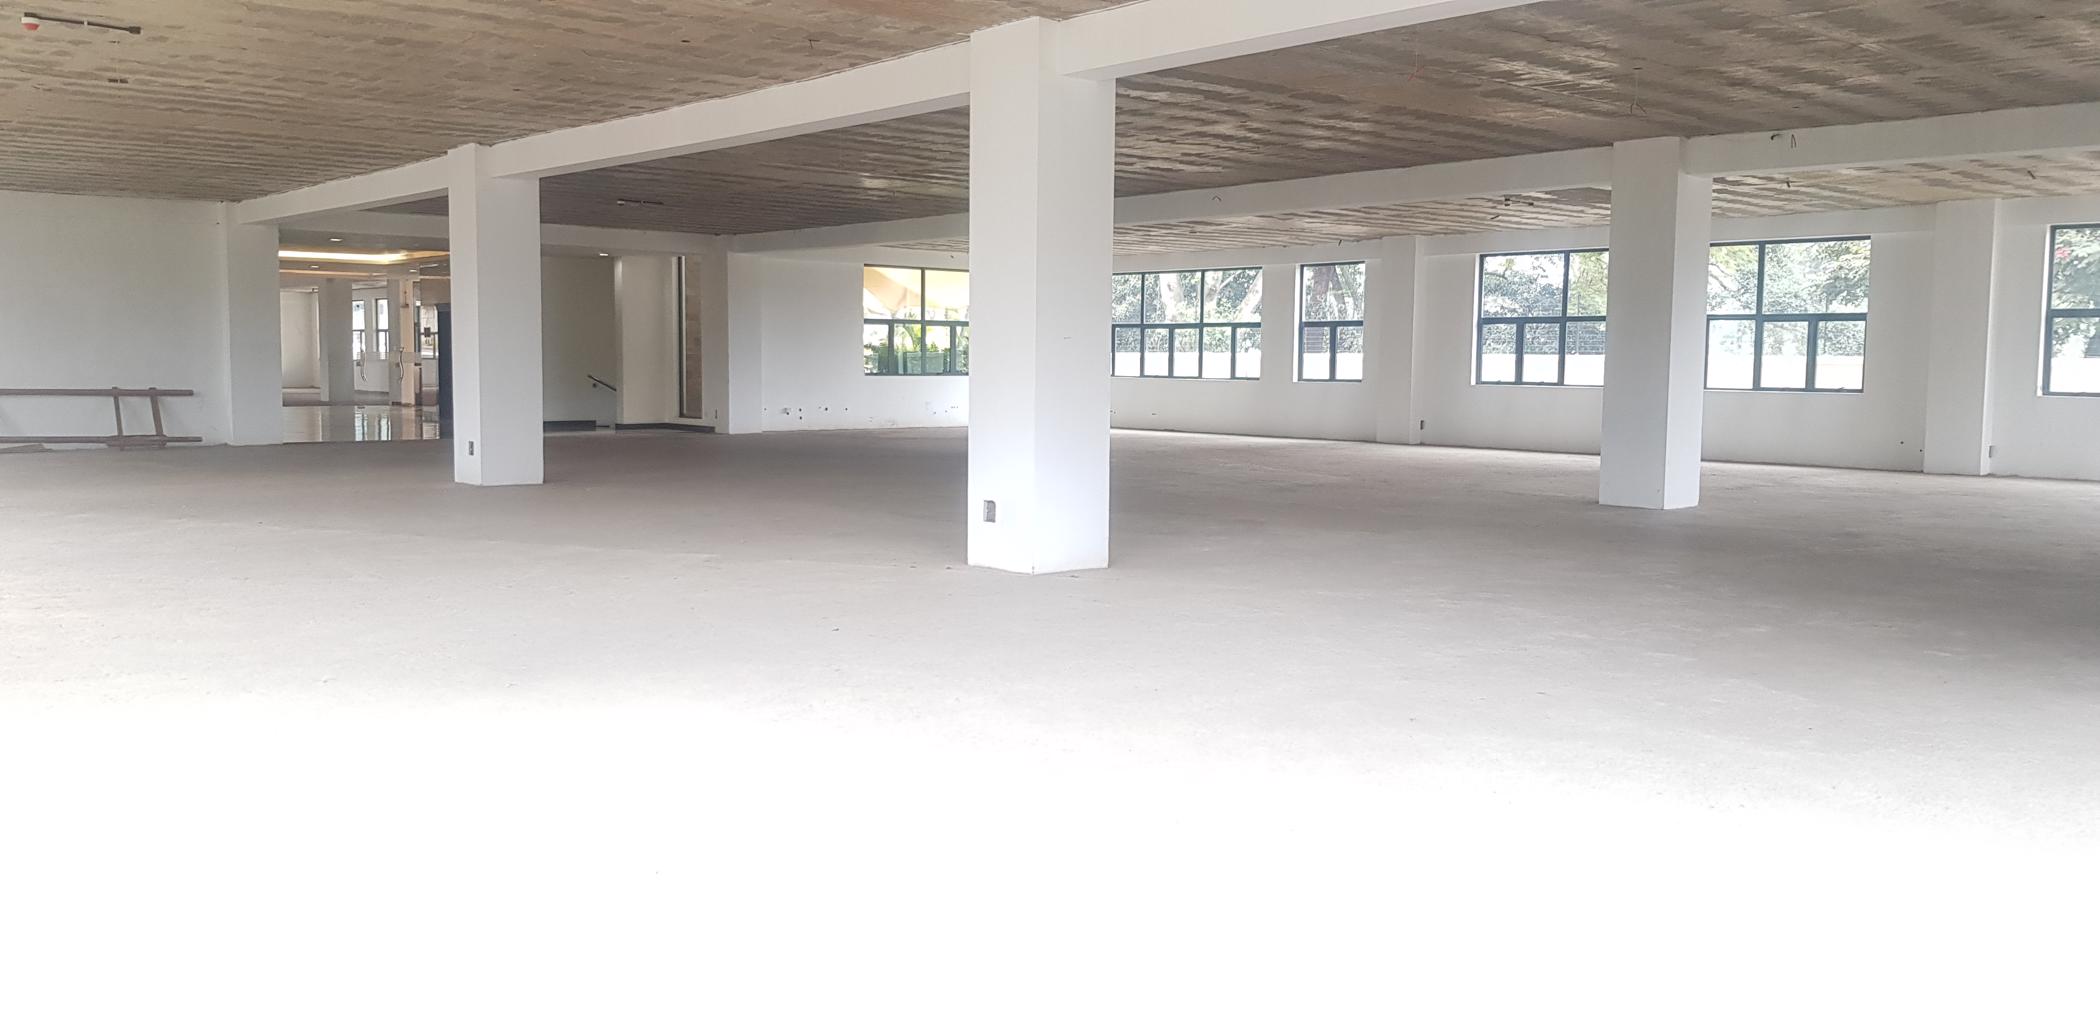 370 m&sup2; commercial retail property to rent in Westlands (Kenya)